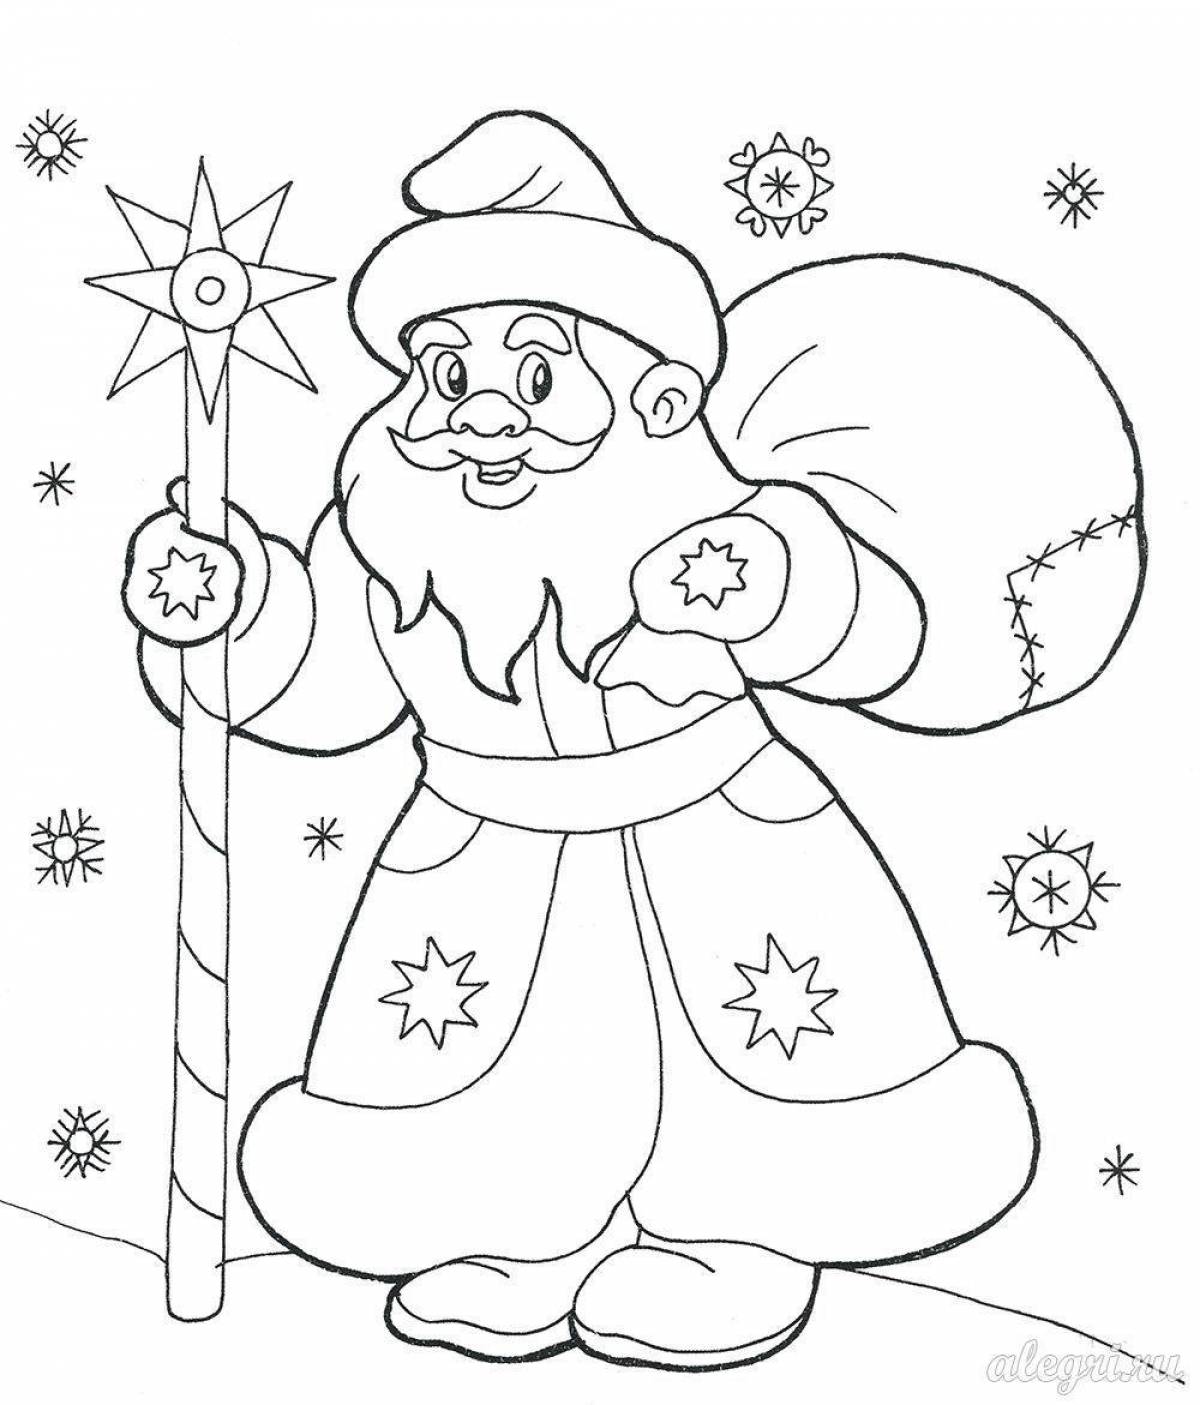 Magic Christmas coloring book for kids